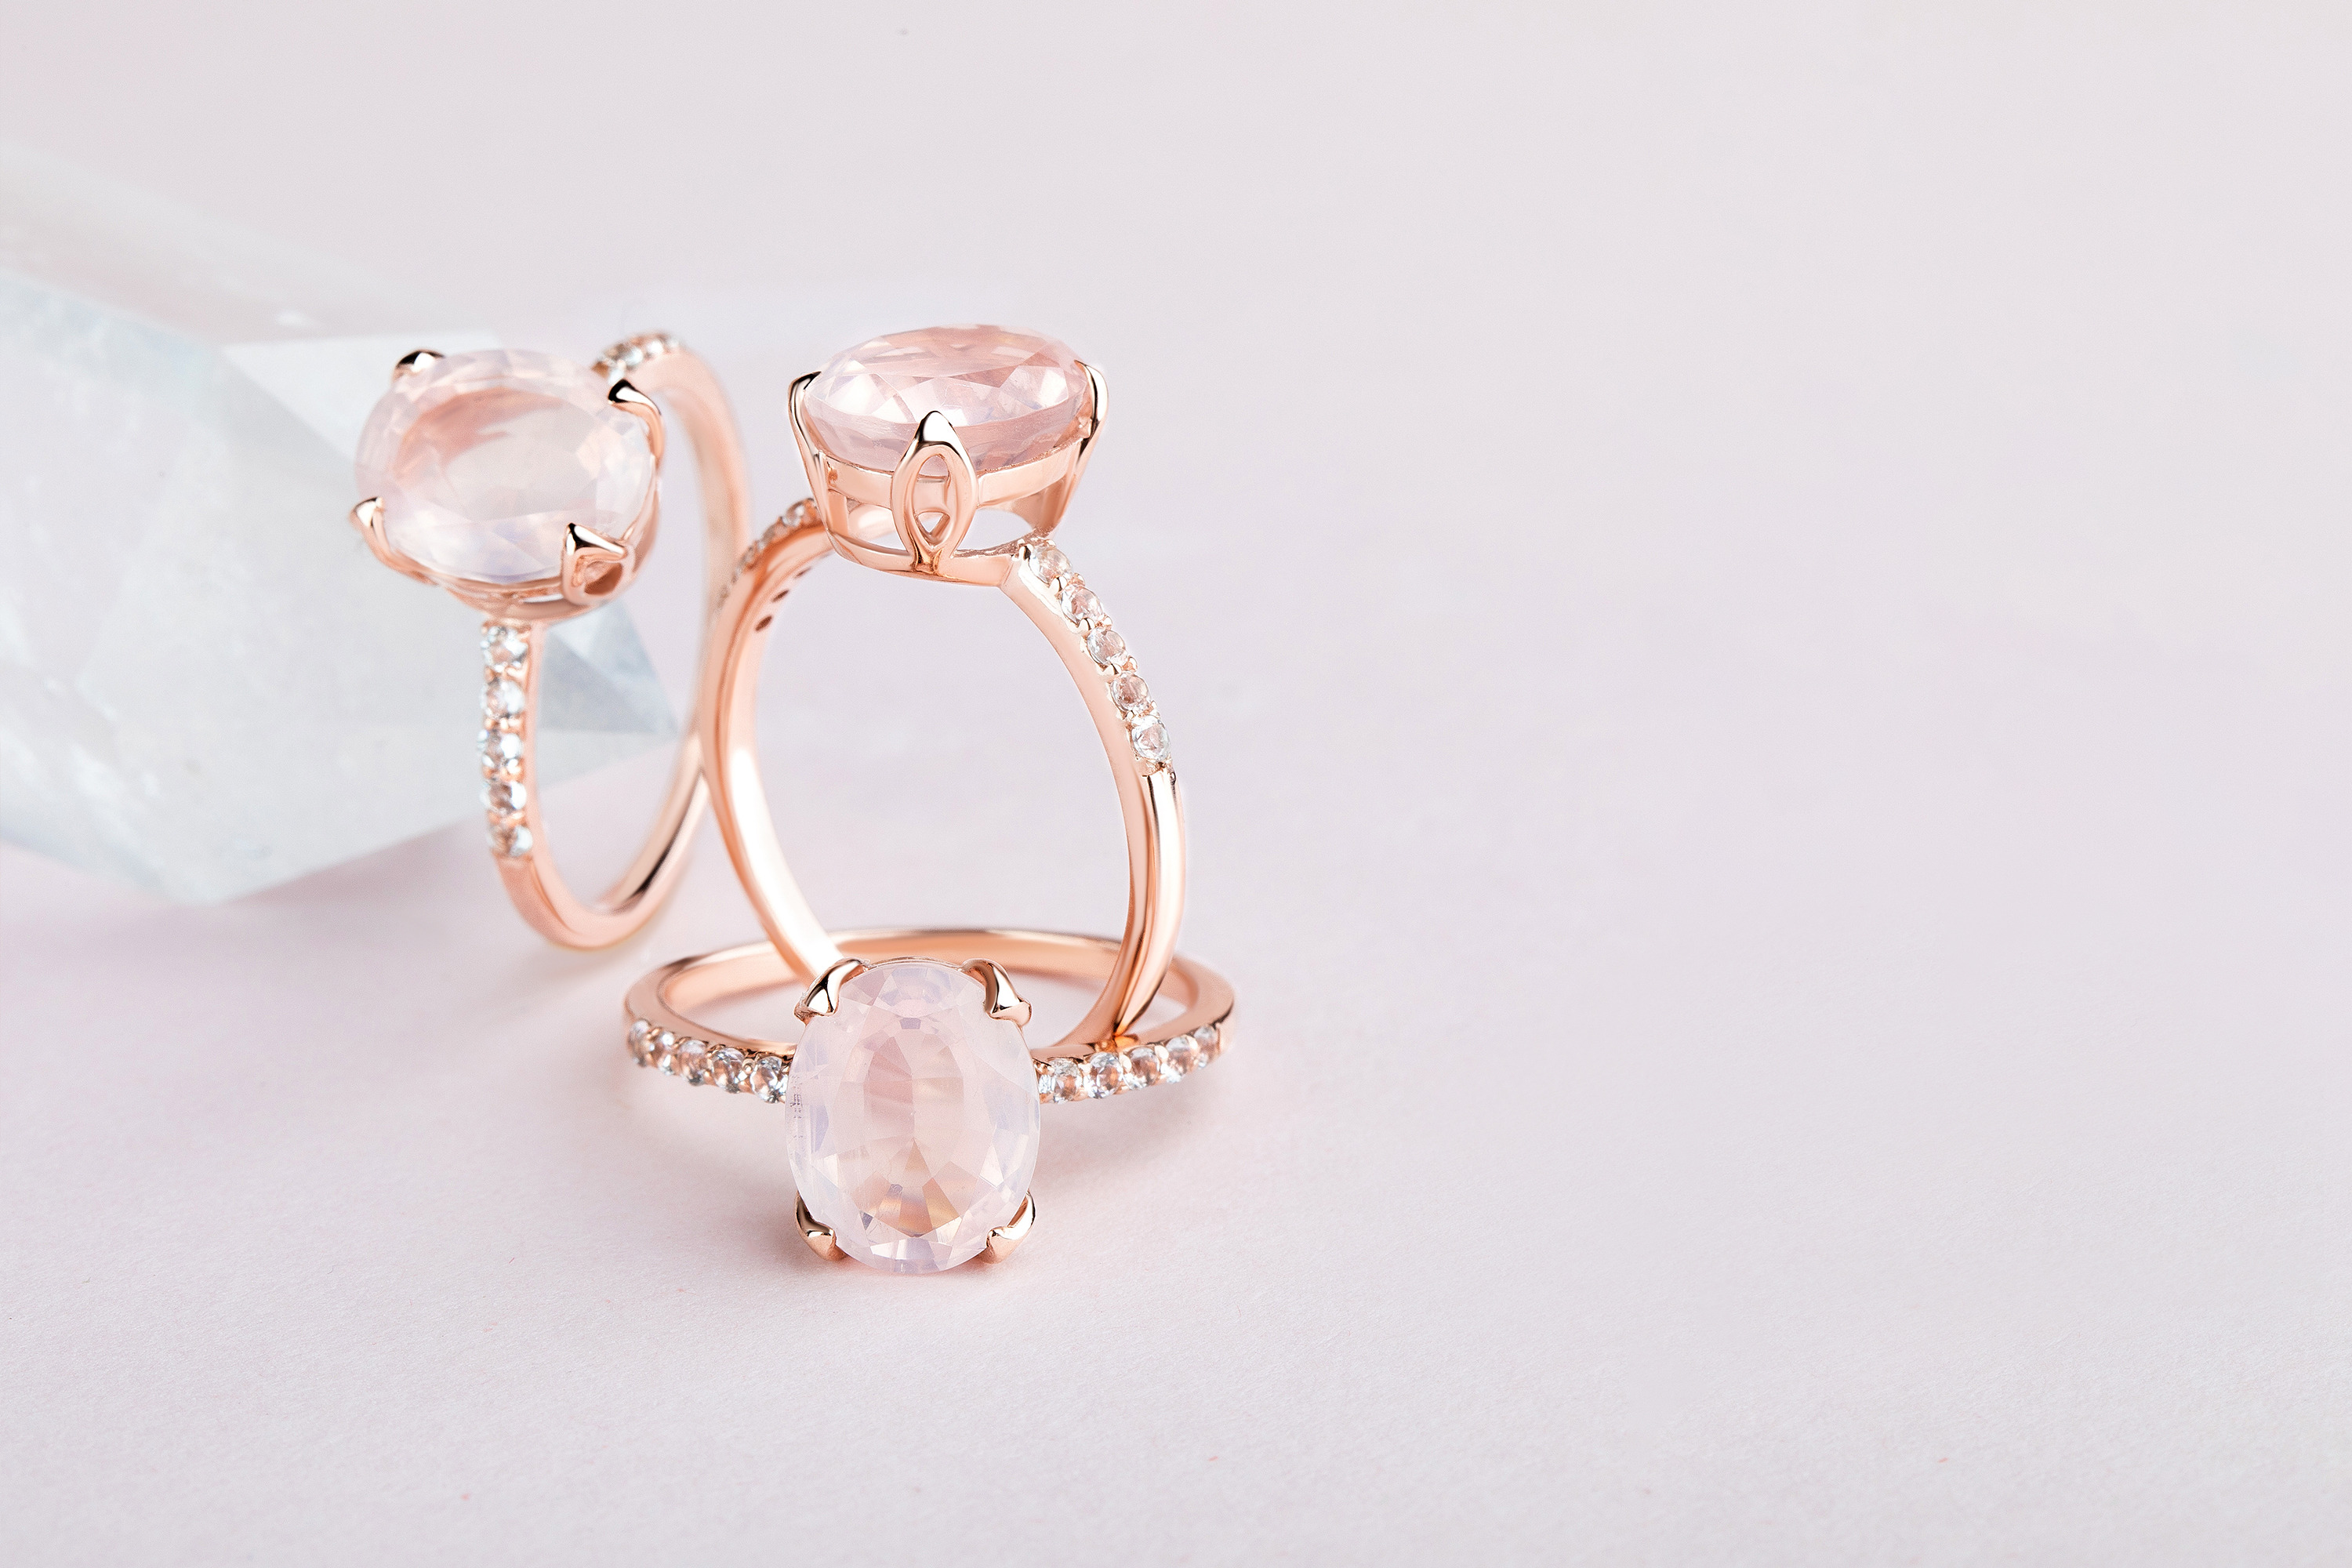 The Rose Quartz Ring Harlow in 14kt Rose Gold Vermeil are shown in different angles.